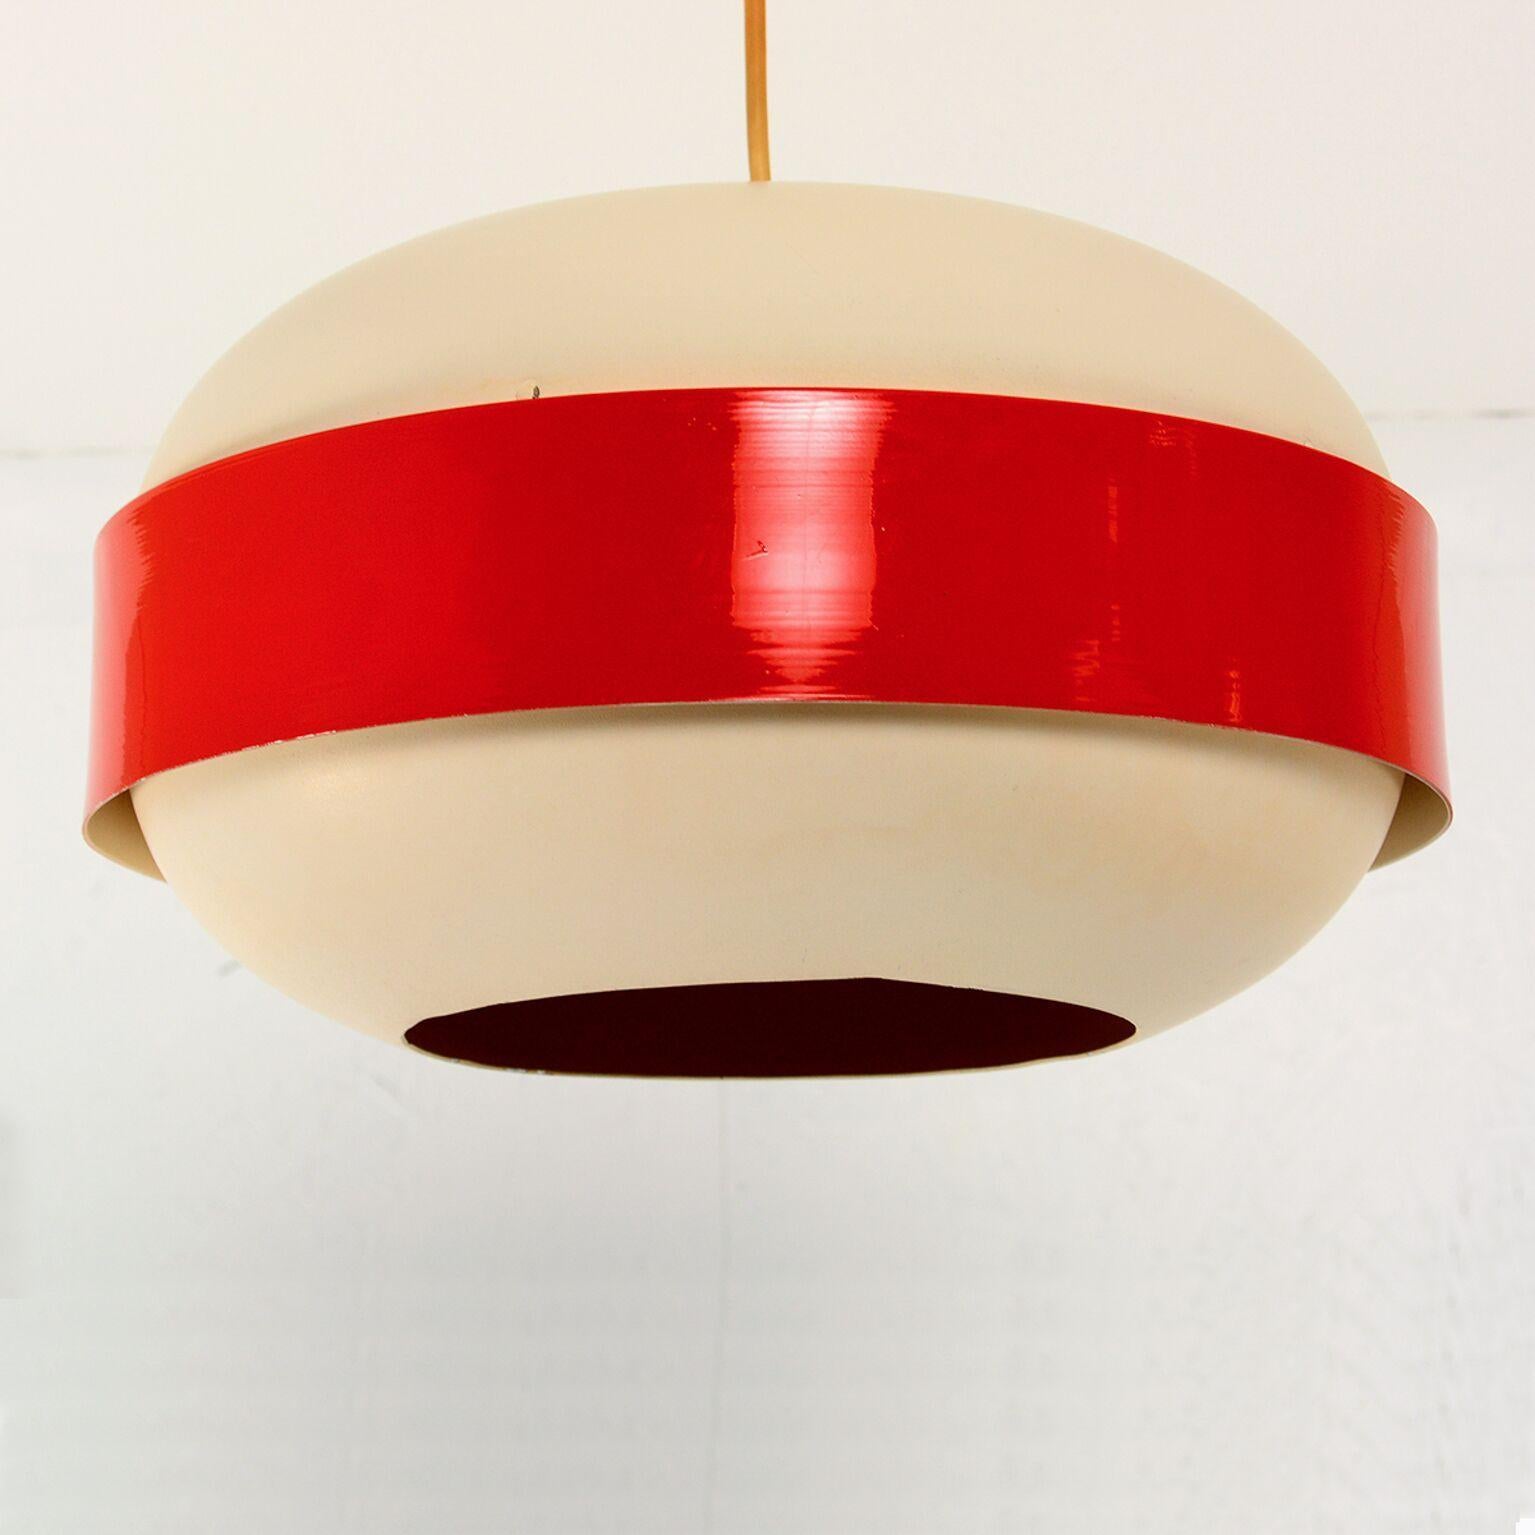 For your consideration: a fun vintage spun aluminum pendant light fixture in the manner of Louis Poulsen and the doo wop pendant design. Dimensions: 16